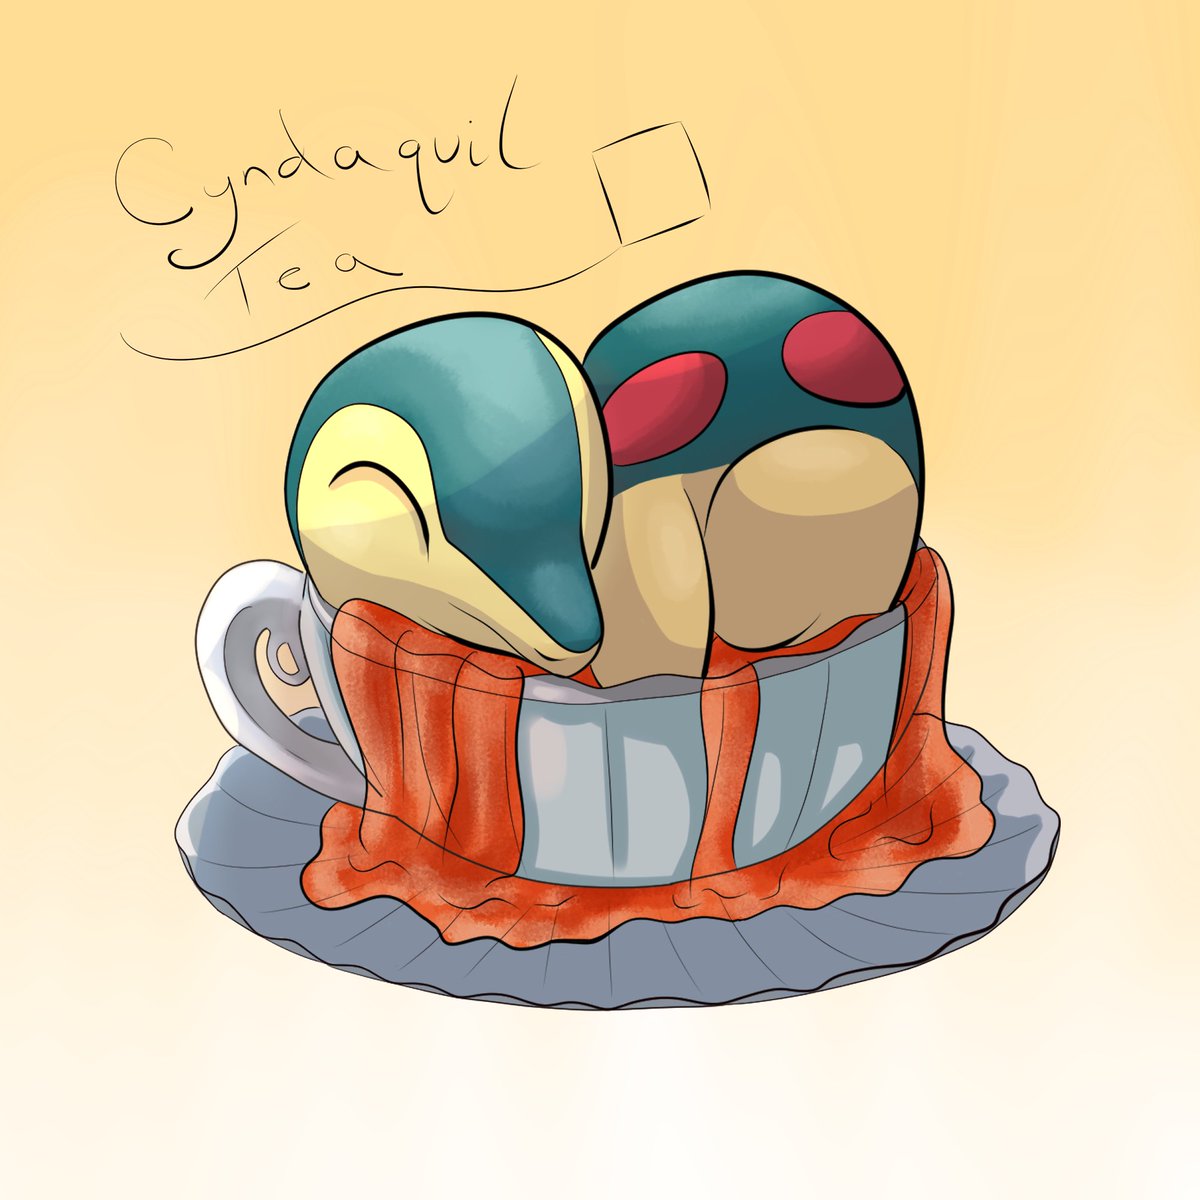 Cyndaquil Infusion! 
Another Pokémon Tea design. 

#pokemon #pokemonart #cyndaquil #teaart #digitalart #stickerdesign